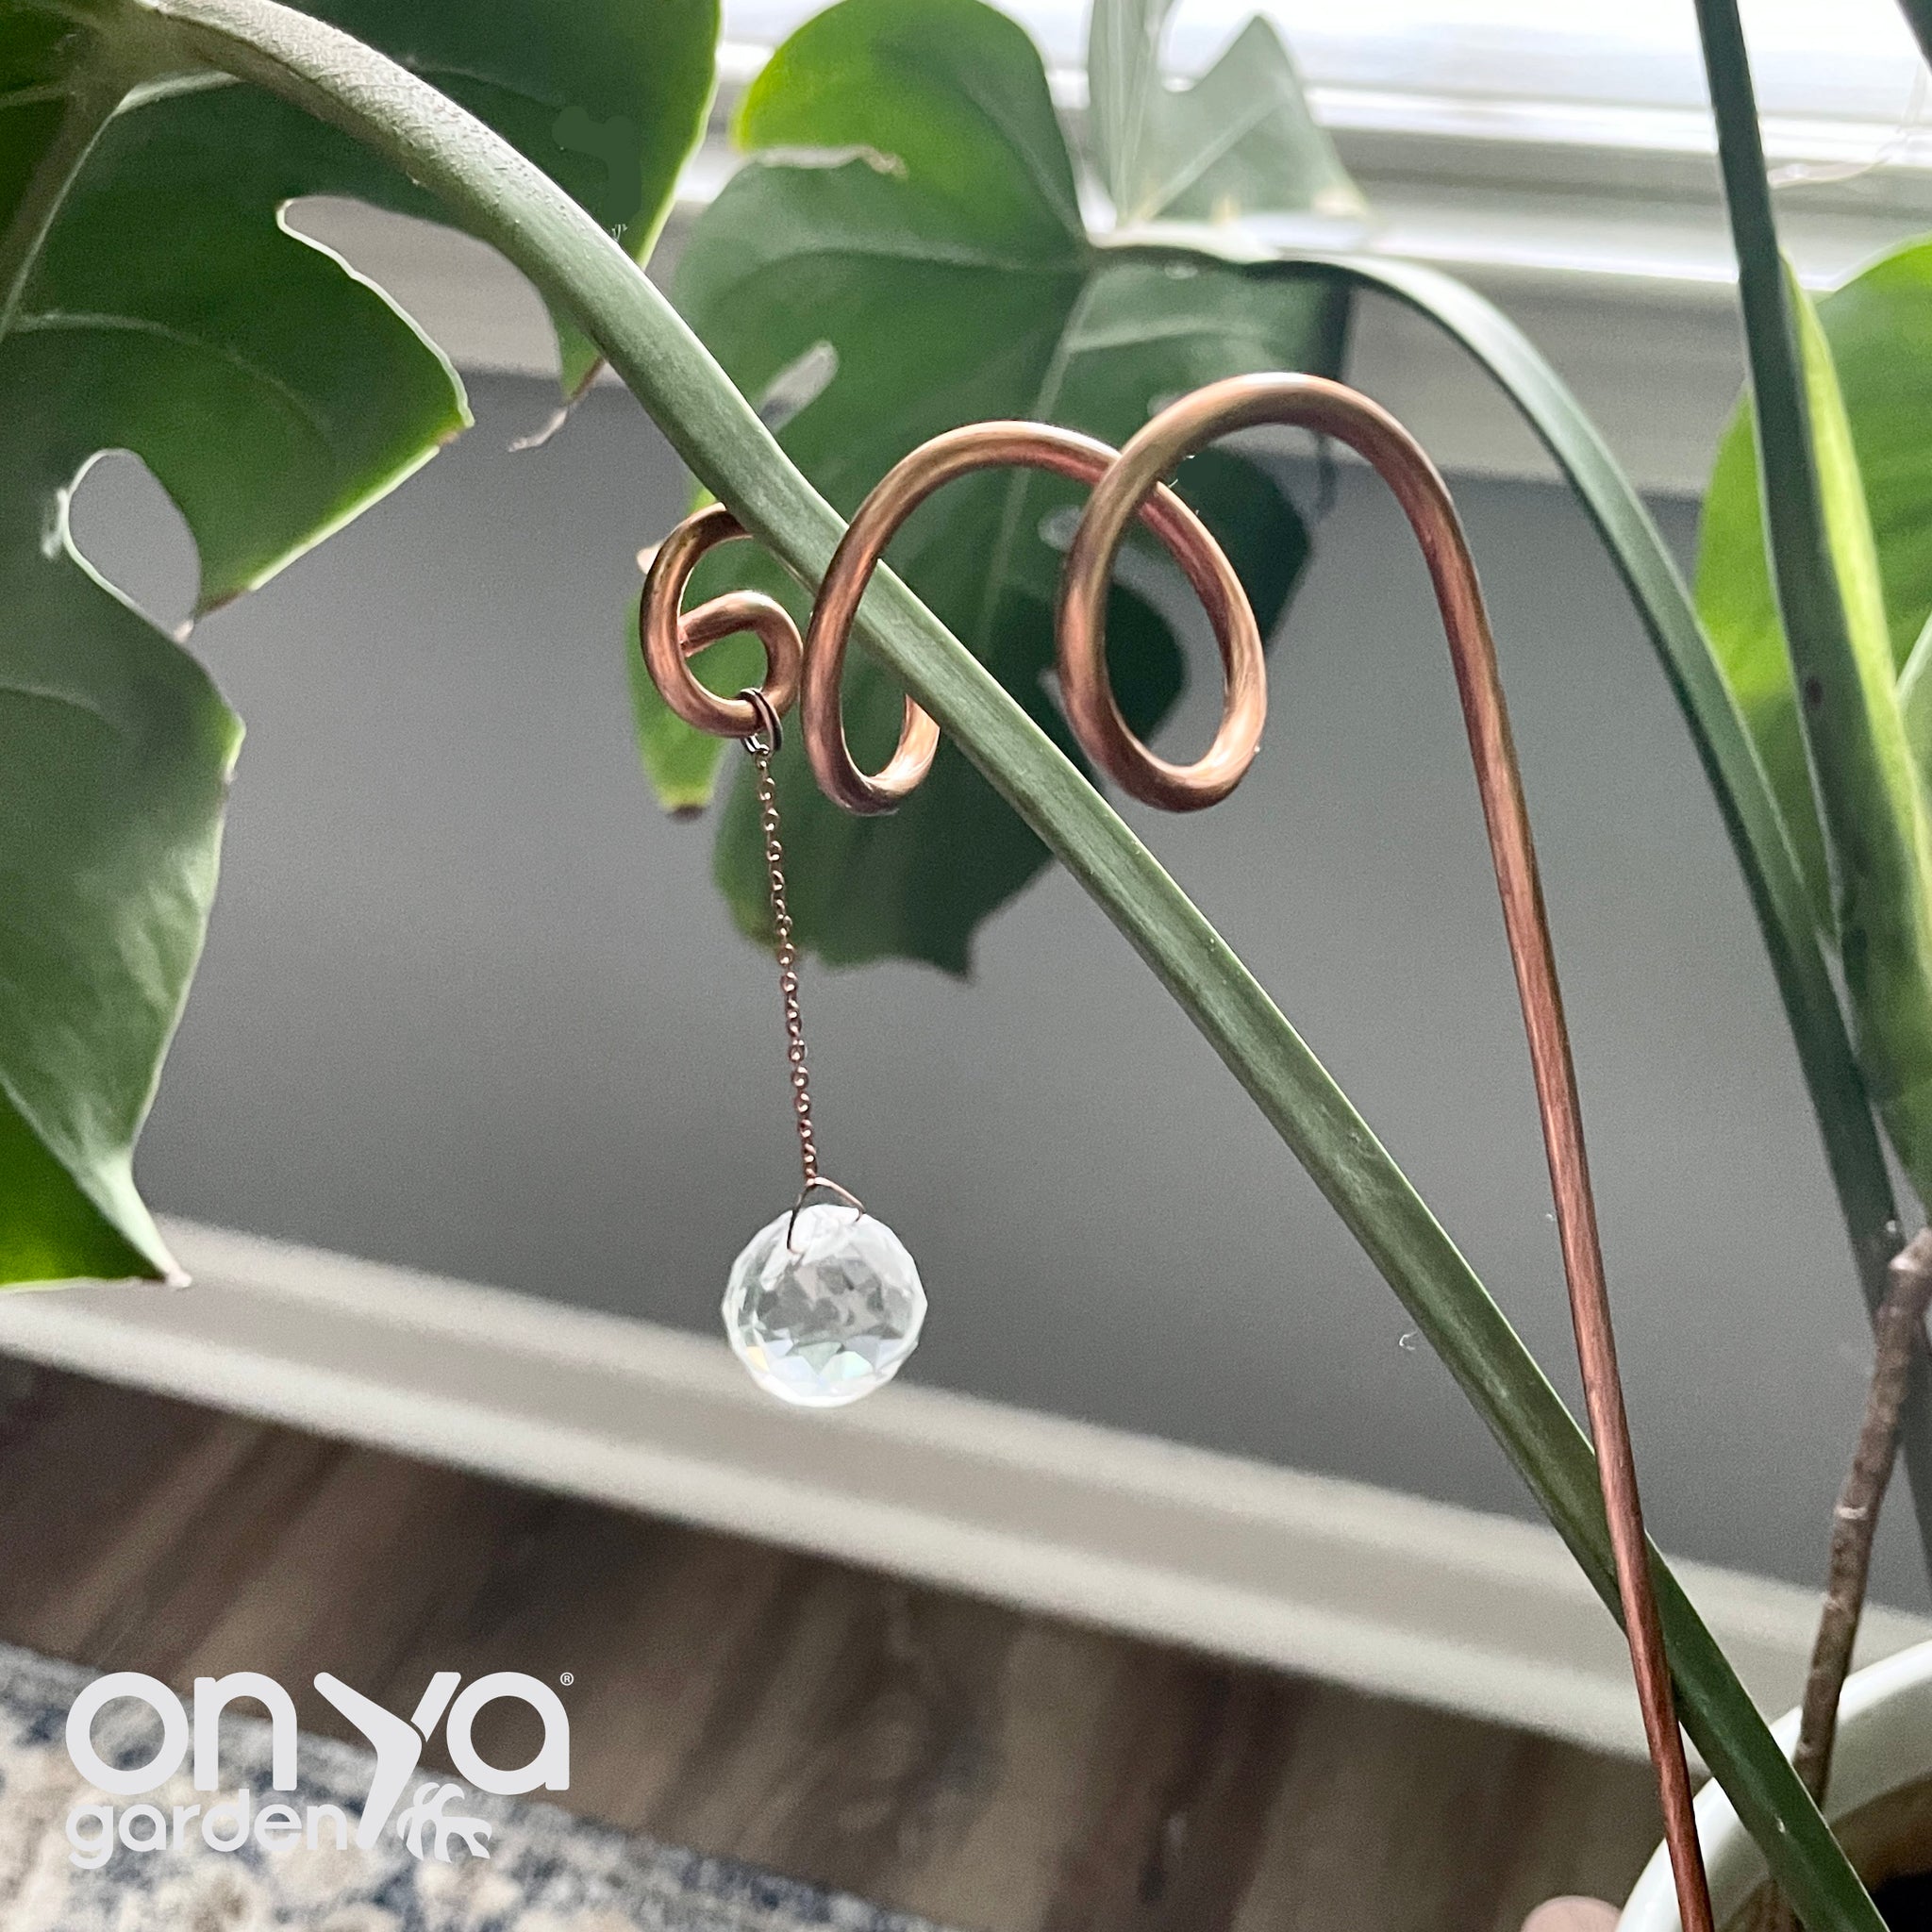 Crystal plant stakes now available! Wrapped with copper wire to